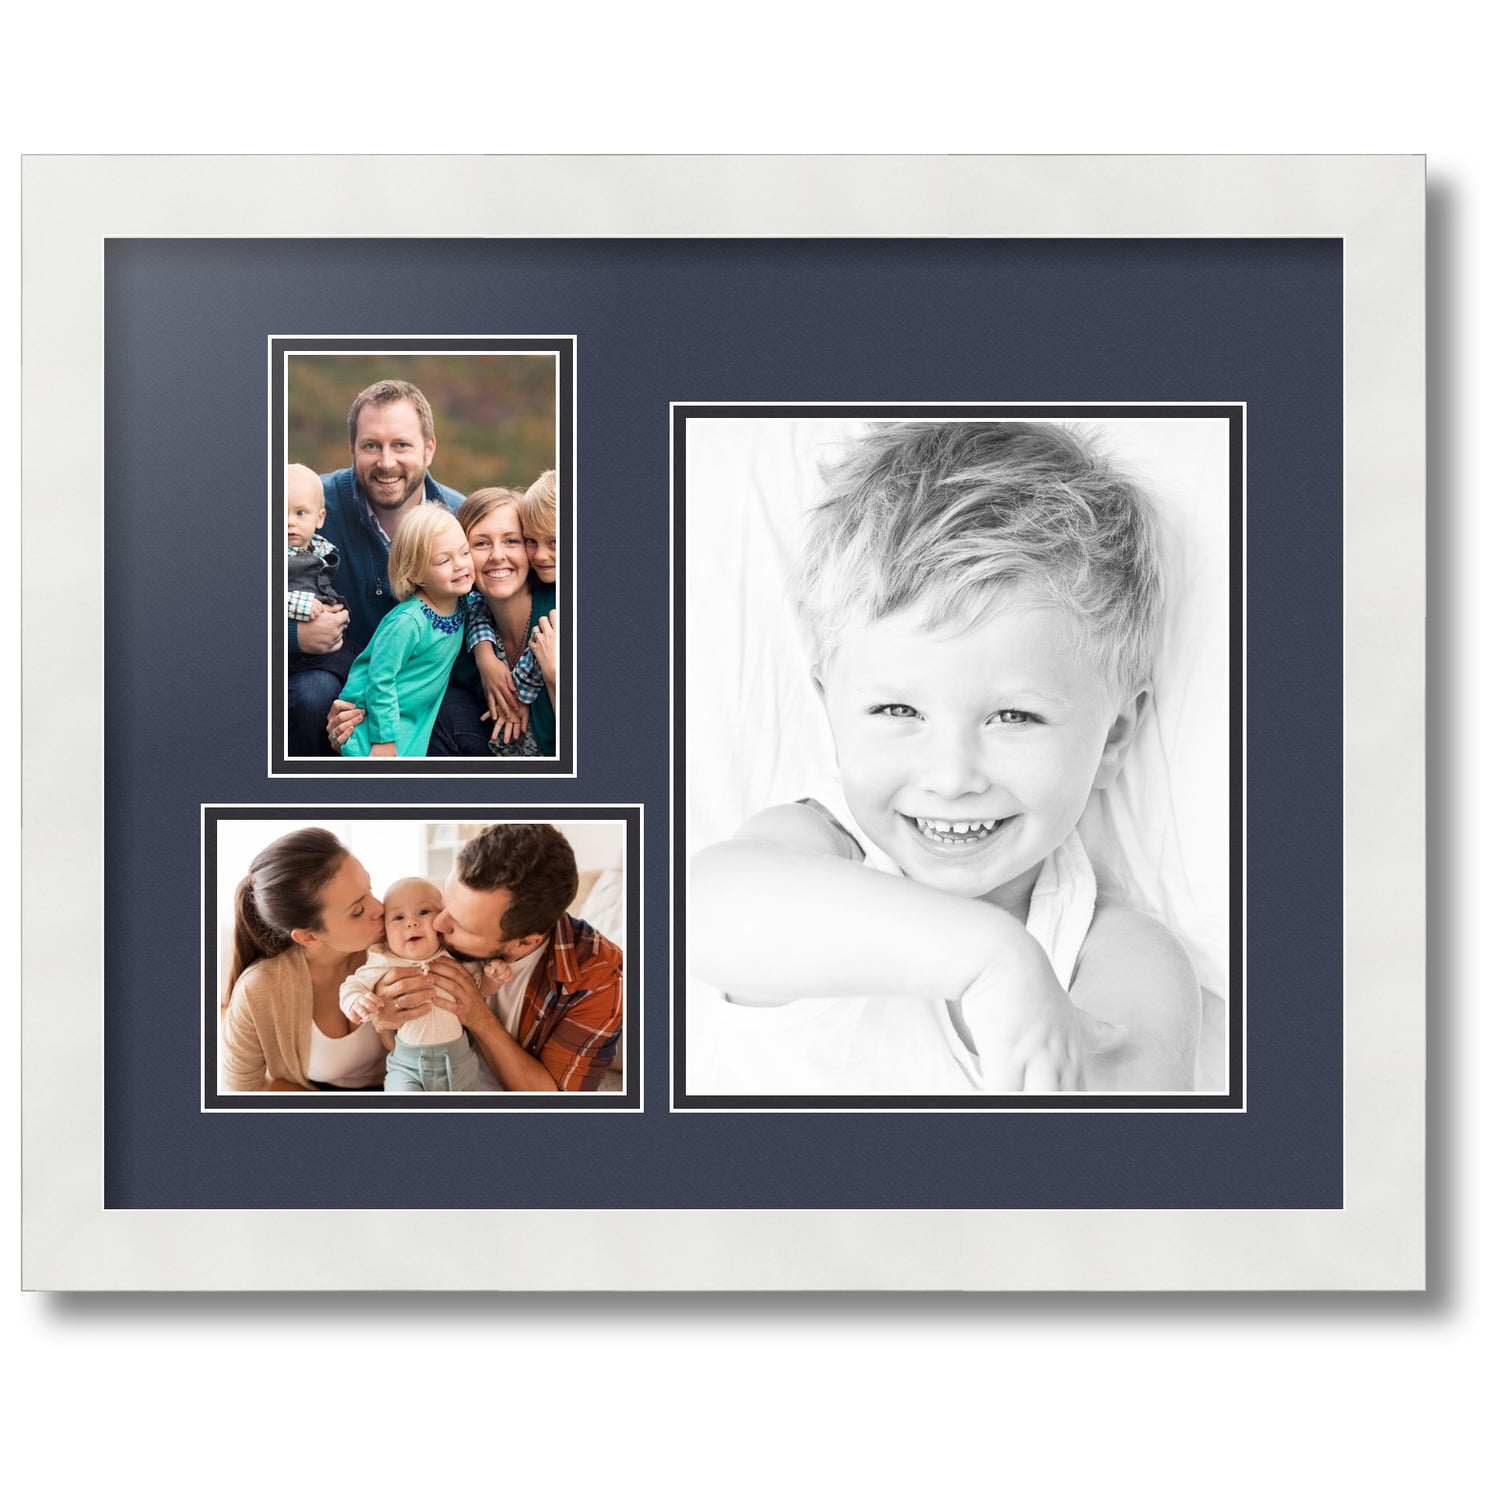 ArtToFrames Collage Photo Picture Frame with 1 - 8x10 and 2 - 5x7 Openings, Framed in White with Paloma and Black Mats (cdm-3966-78), Other